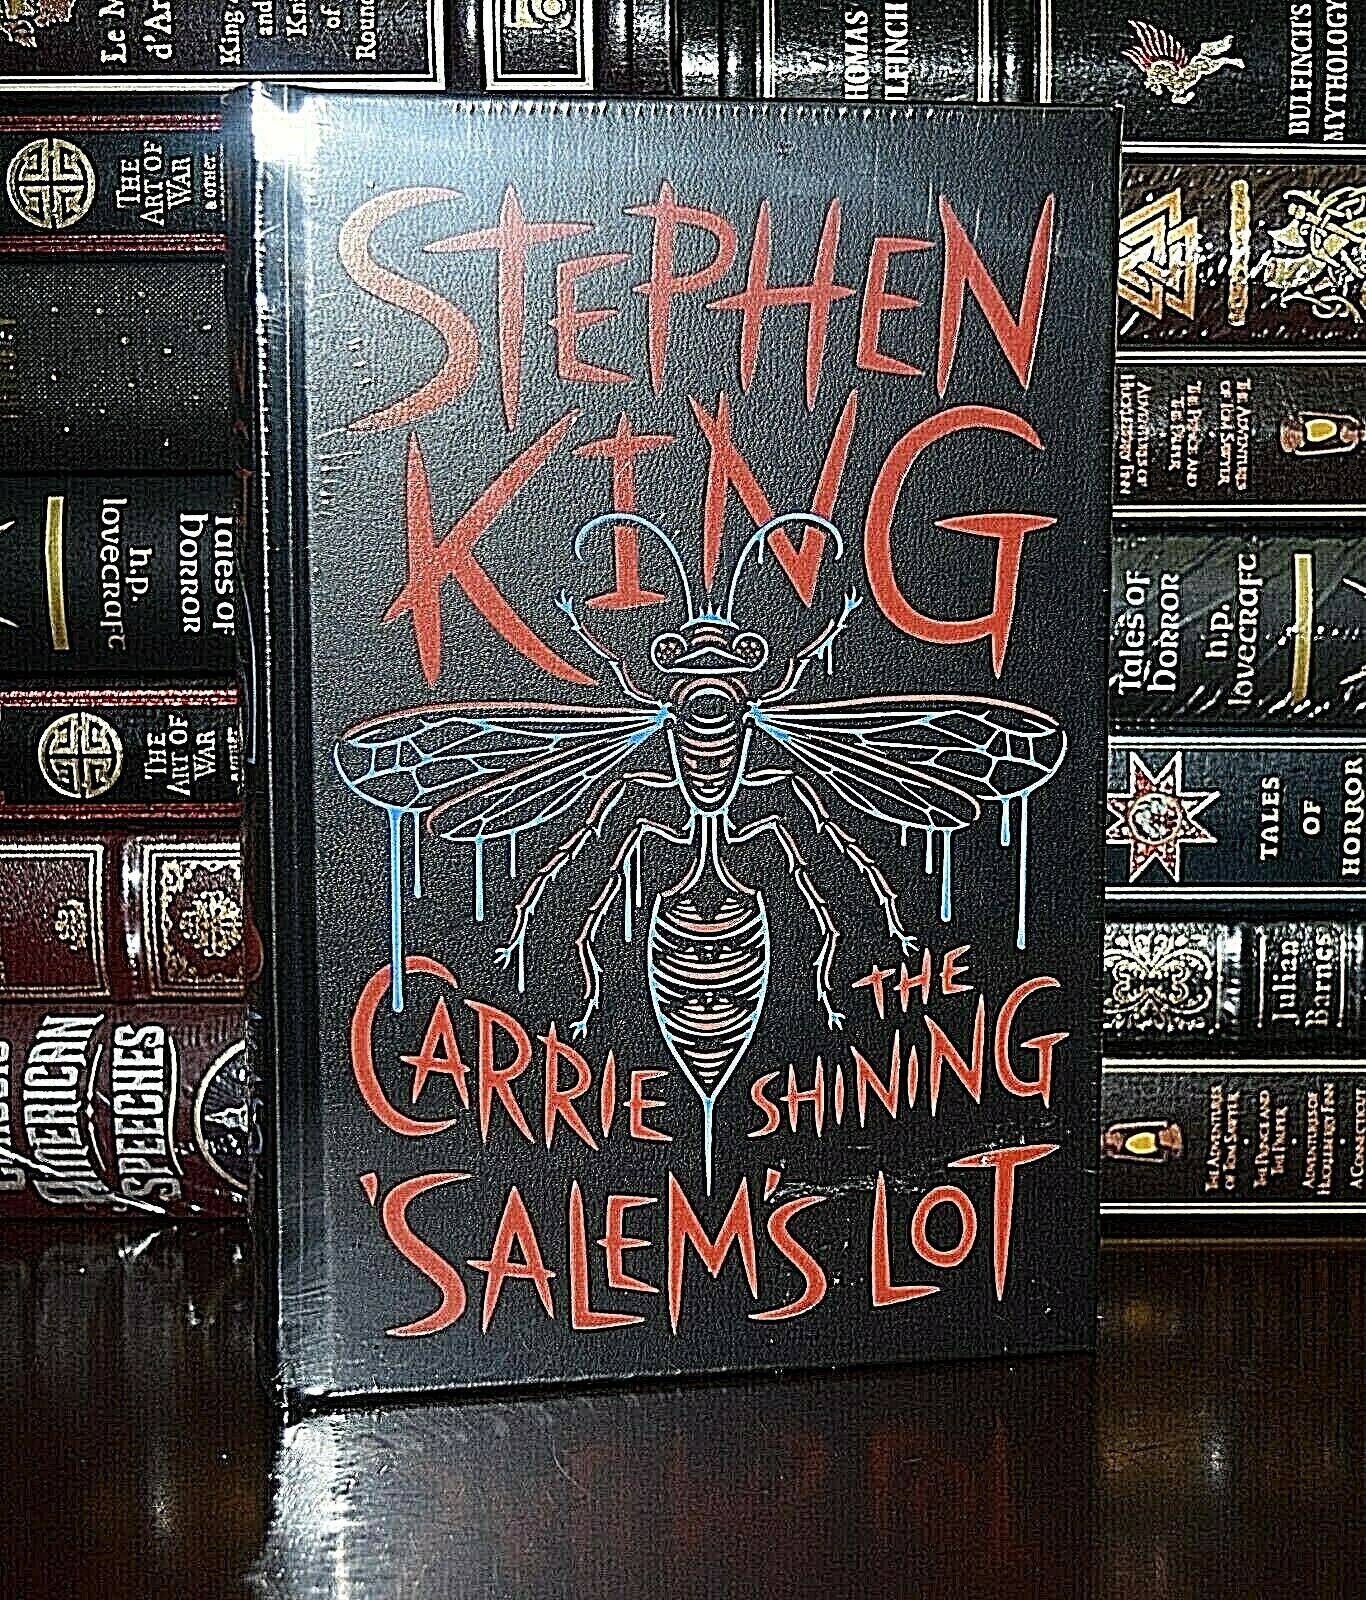 New Novels Stephen King Sealed Leather Bound Carrie Shining Salem's Lot Deluxe Без бренда